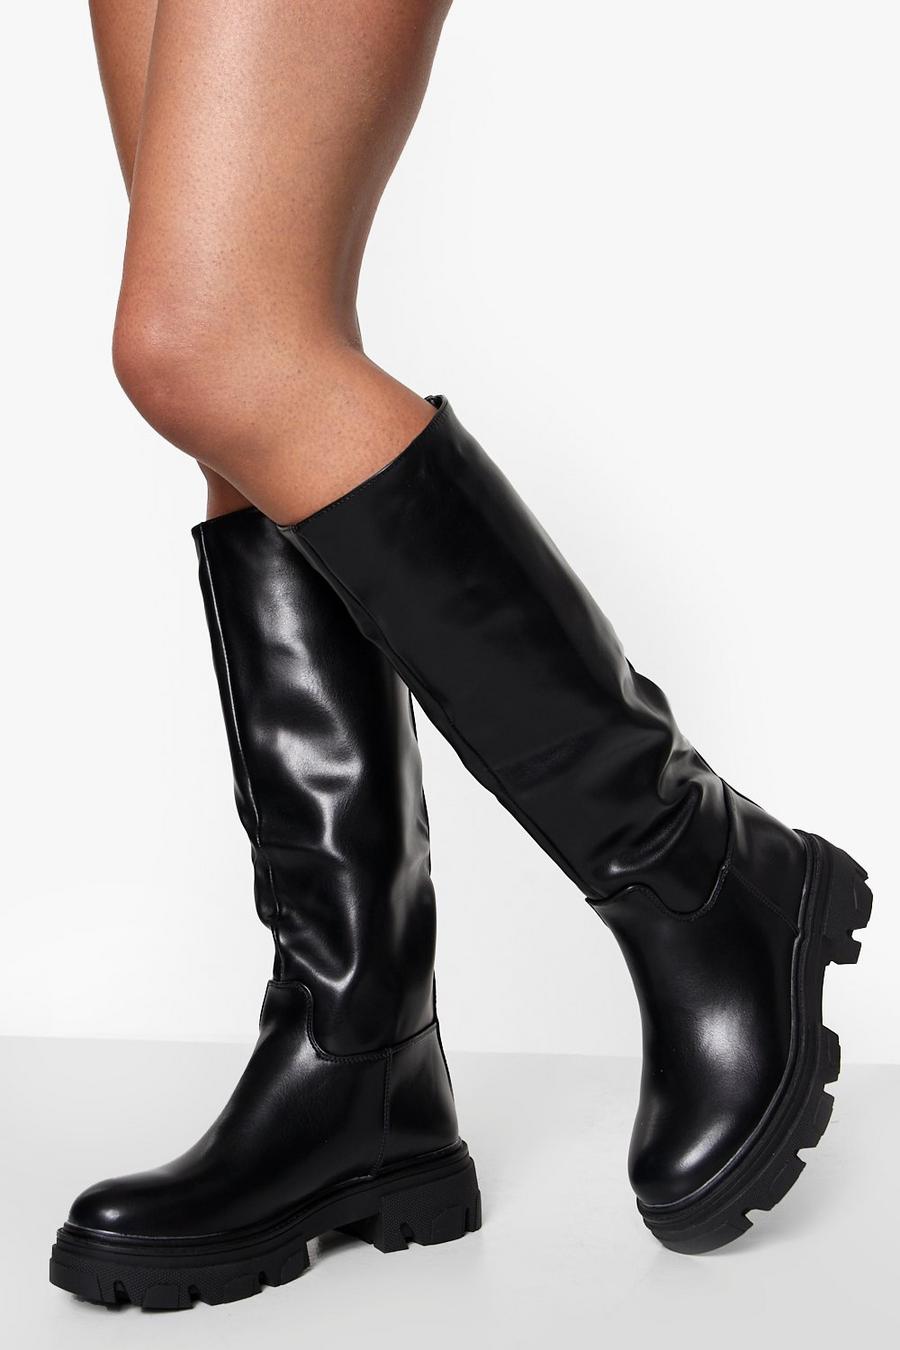 Black svart Cleated Sole Pull On Knee High Boots